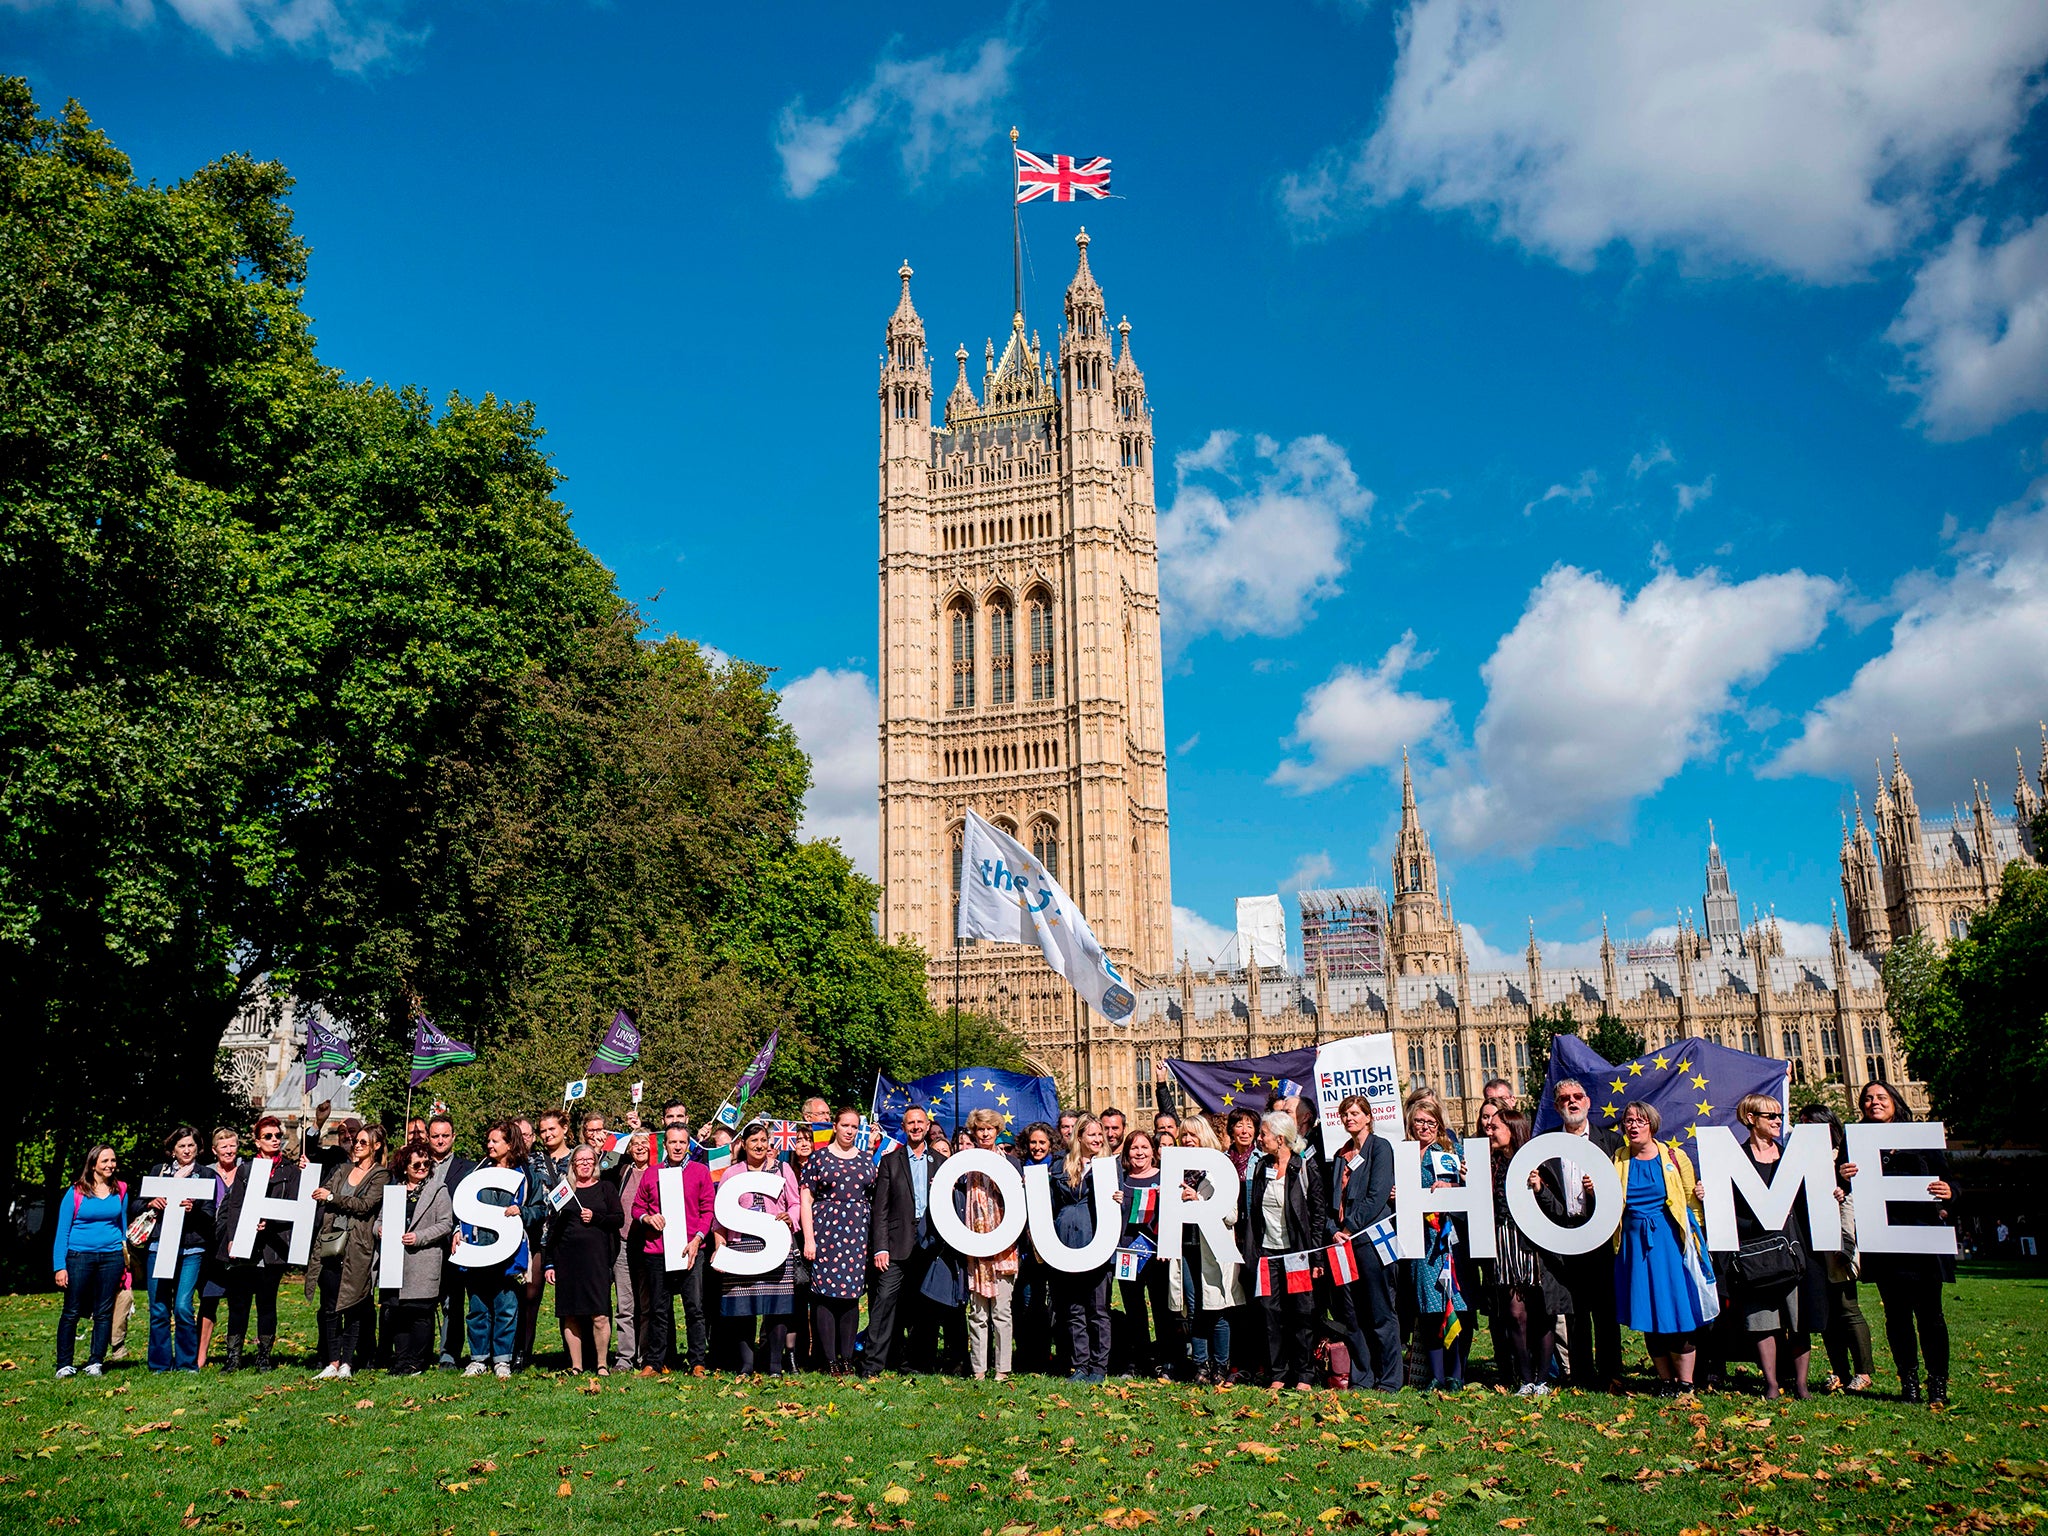 Getting their voices heard: demonstrators campaign for the rights of EU citizens in the UK